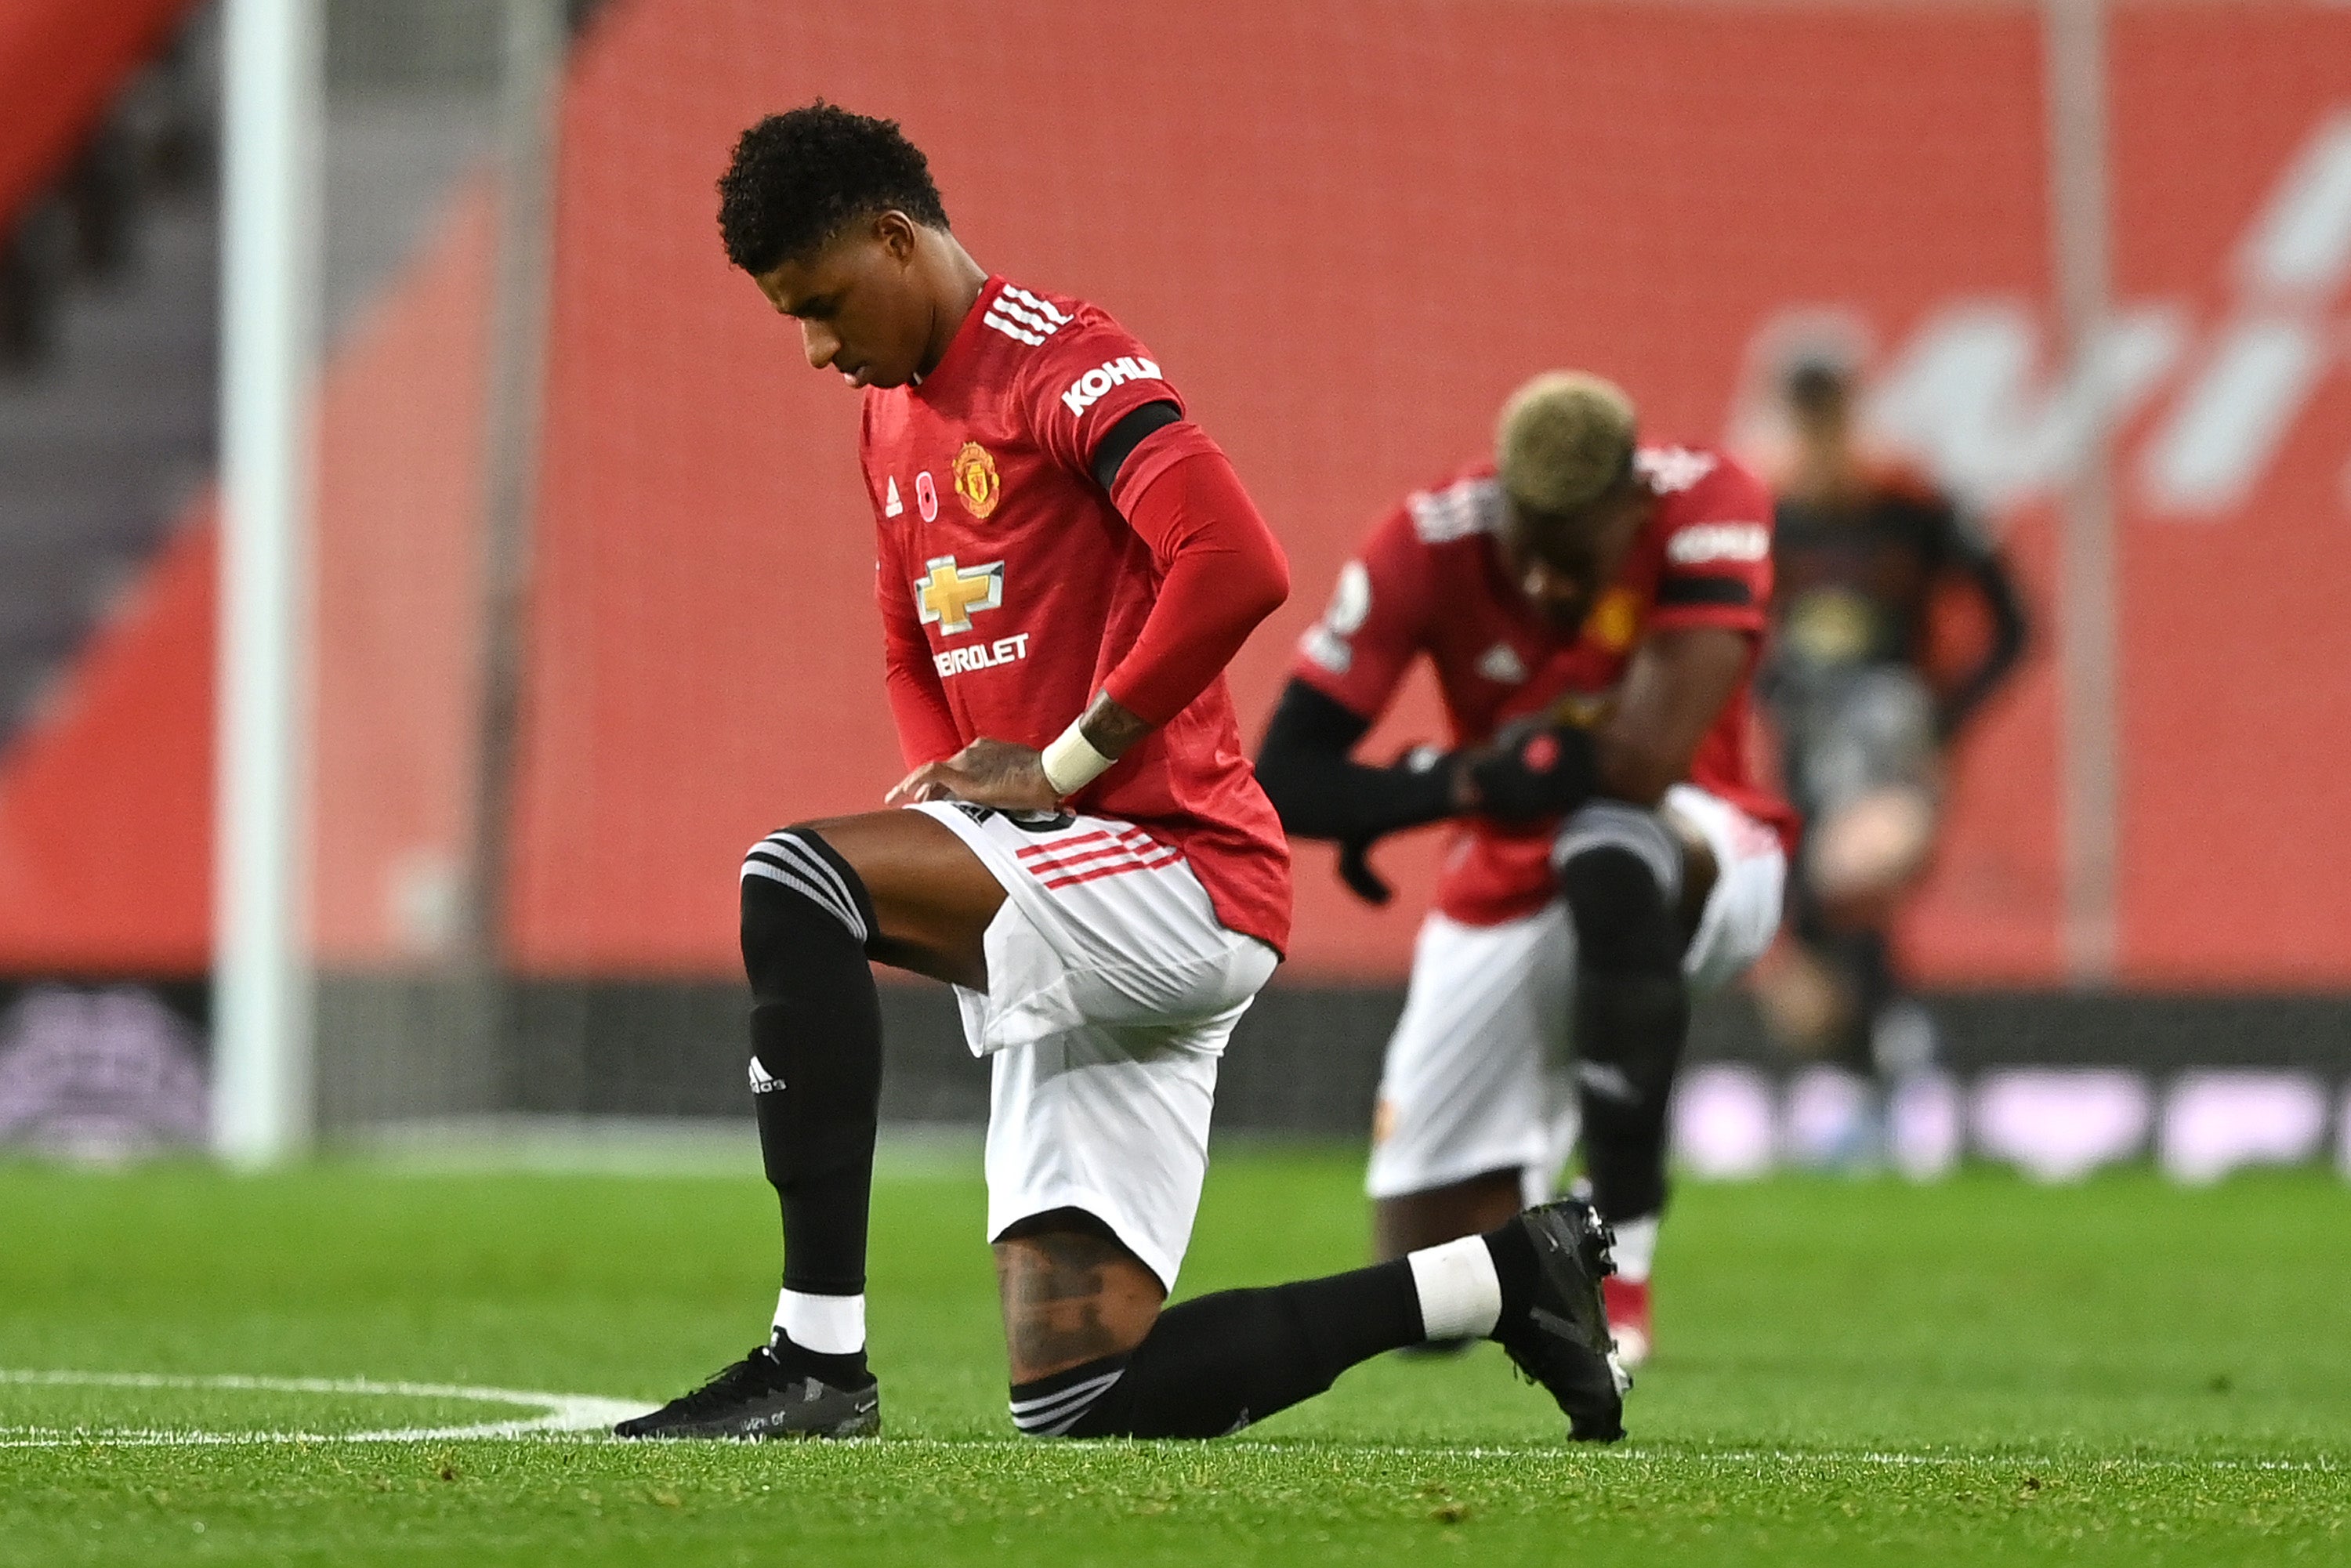 Marcus Rashford of Manchester United takes a knee in support of the Black Lives Matter movement on 1 November